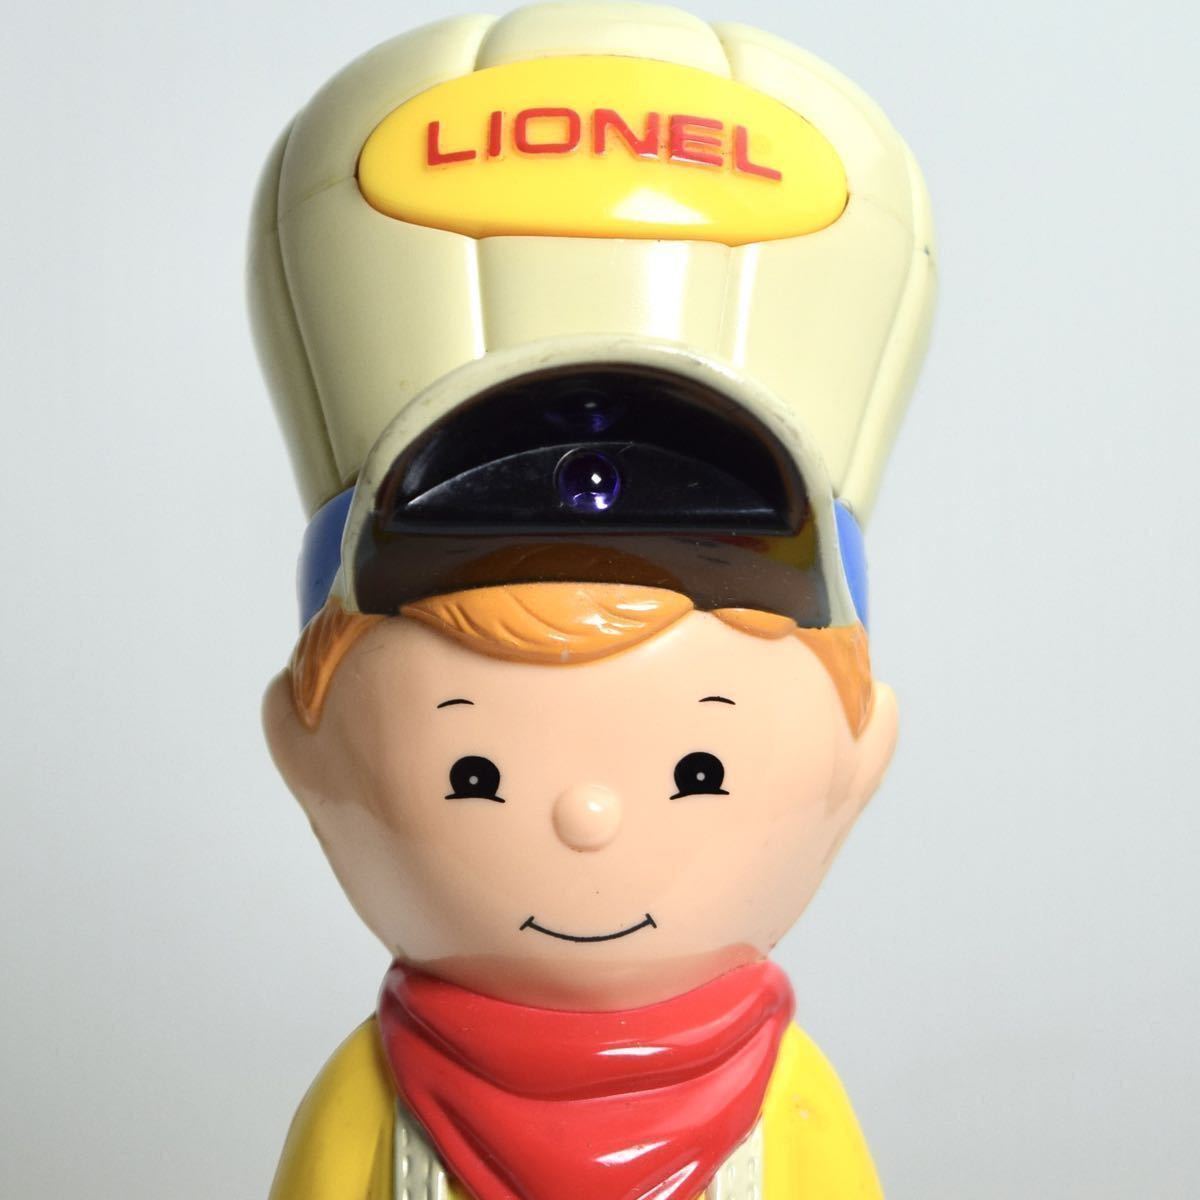 Rare Lionel Trains 90s Vintage Toy Figure from Pollack Advertising Museum